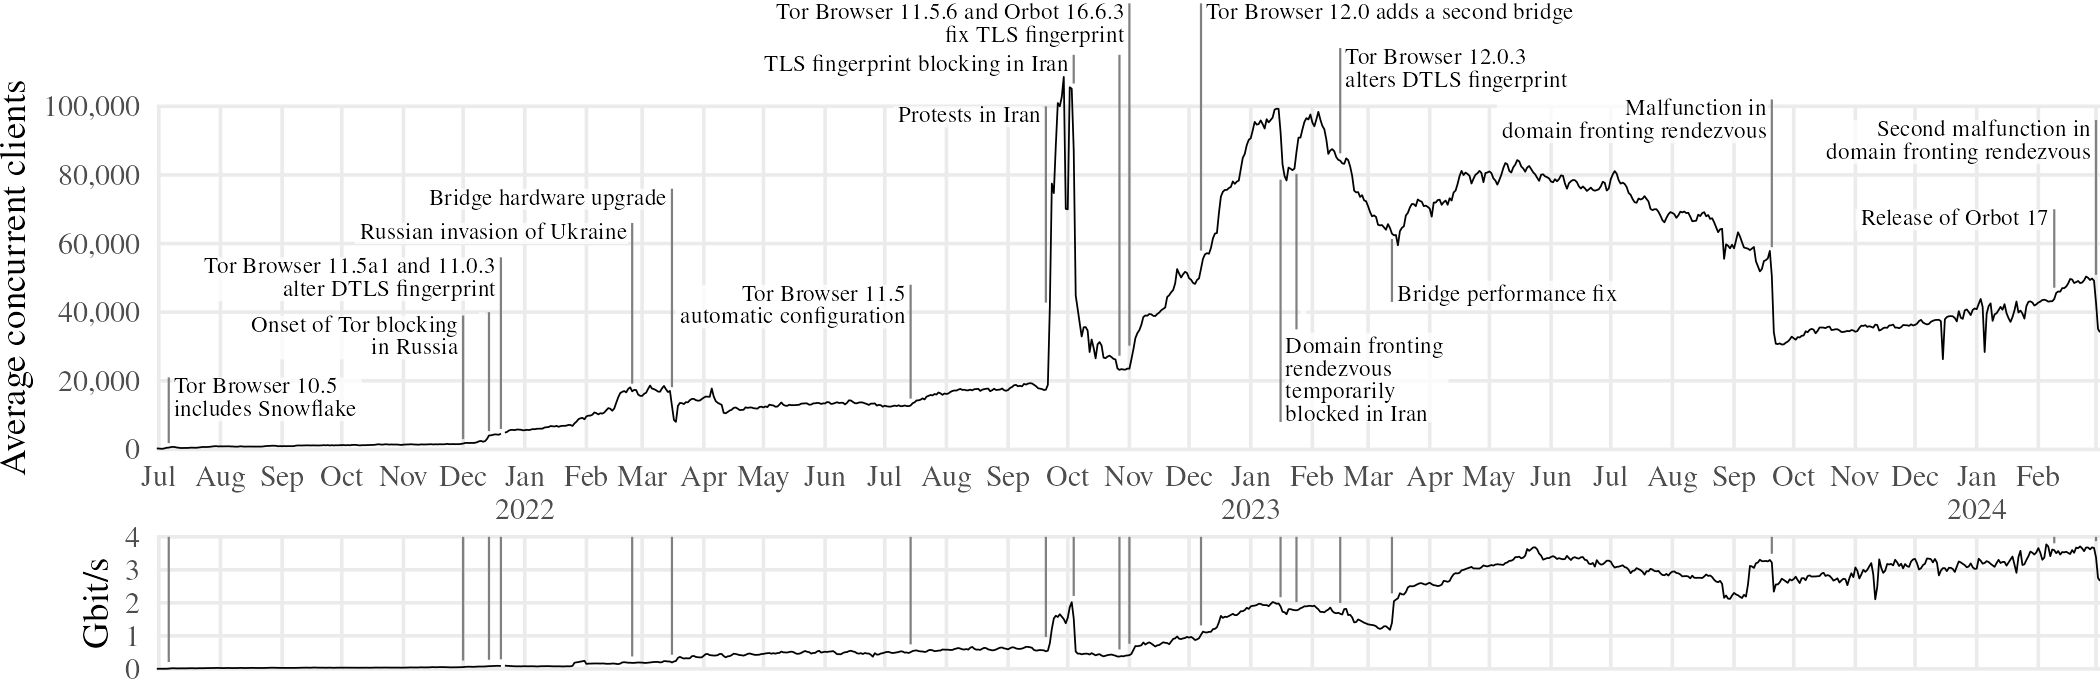 
Two line graphs with a shared horizontal time axis.
The upper graph, “Average concurrent clients,” ranges from 0 to 100,000.
The lower graph, “Gbit/s,” ranges from 0 to 4.
The time axis goes from July 2021 to March 2024.
Events from the text are marked.
2021-07-06: Tor Browser 10.5 includes Snowflake;
2021-12-01: Onset of Tor blocking in Russia;
2021-12-14: & 2021-12-20: Tor Browser 11.5a1 and 11.0.3 alter DTLS fingerprint;
2022-02-24: Russian invasion of Ukraine;
2022-03-16: Bridge hardware upgrade;
2022-07-14: Tor Browser 11.5 automatic configuration;
2022-09-20: Protests in Iran;
2022-10-04: TLS fingerprint blocking in Iran;
2022-10-27 & 2022-11-01: Tor Browser 11.5.6 and Orbot 16.6.3 fix TLS fingerprint;
2022-12-07: Tor Browser 12.0 adds a second bridge;
2023-01-16 – 2023-01-24: Domain fronting rendezvous temporarily blocked in Iran;
2024-02-09: Release of Orbot 17;
2024-03-01: Second malfunction in domain fronting rendezvous.
